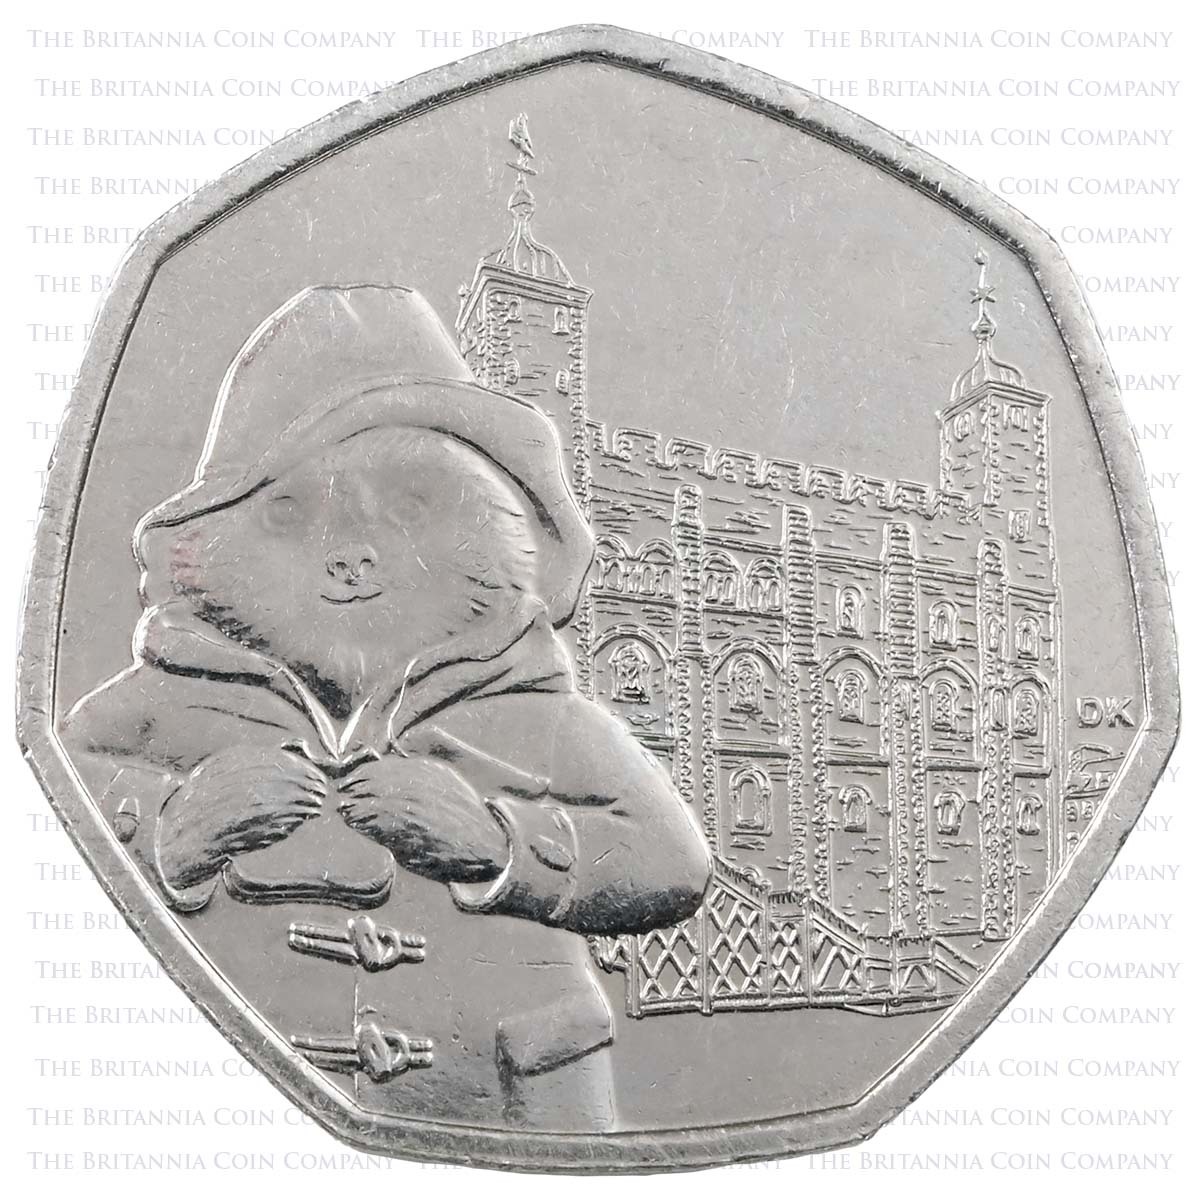 2019 Paddington Bear At The Tower Of London Circulated Fifty Pence Coin Reverse